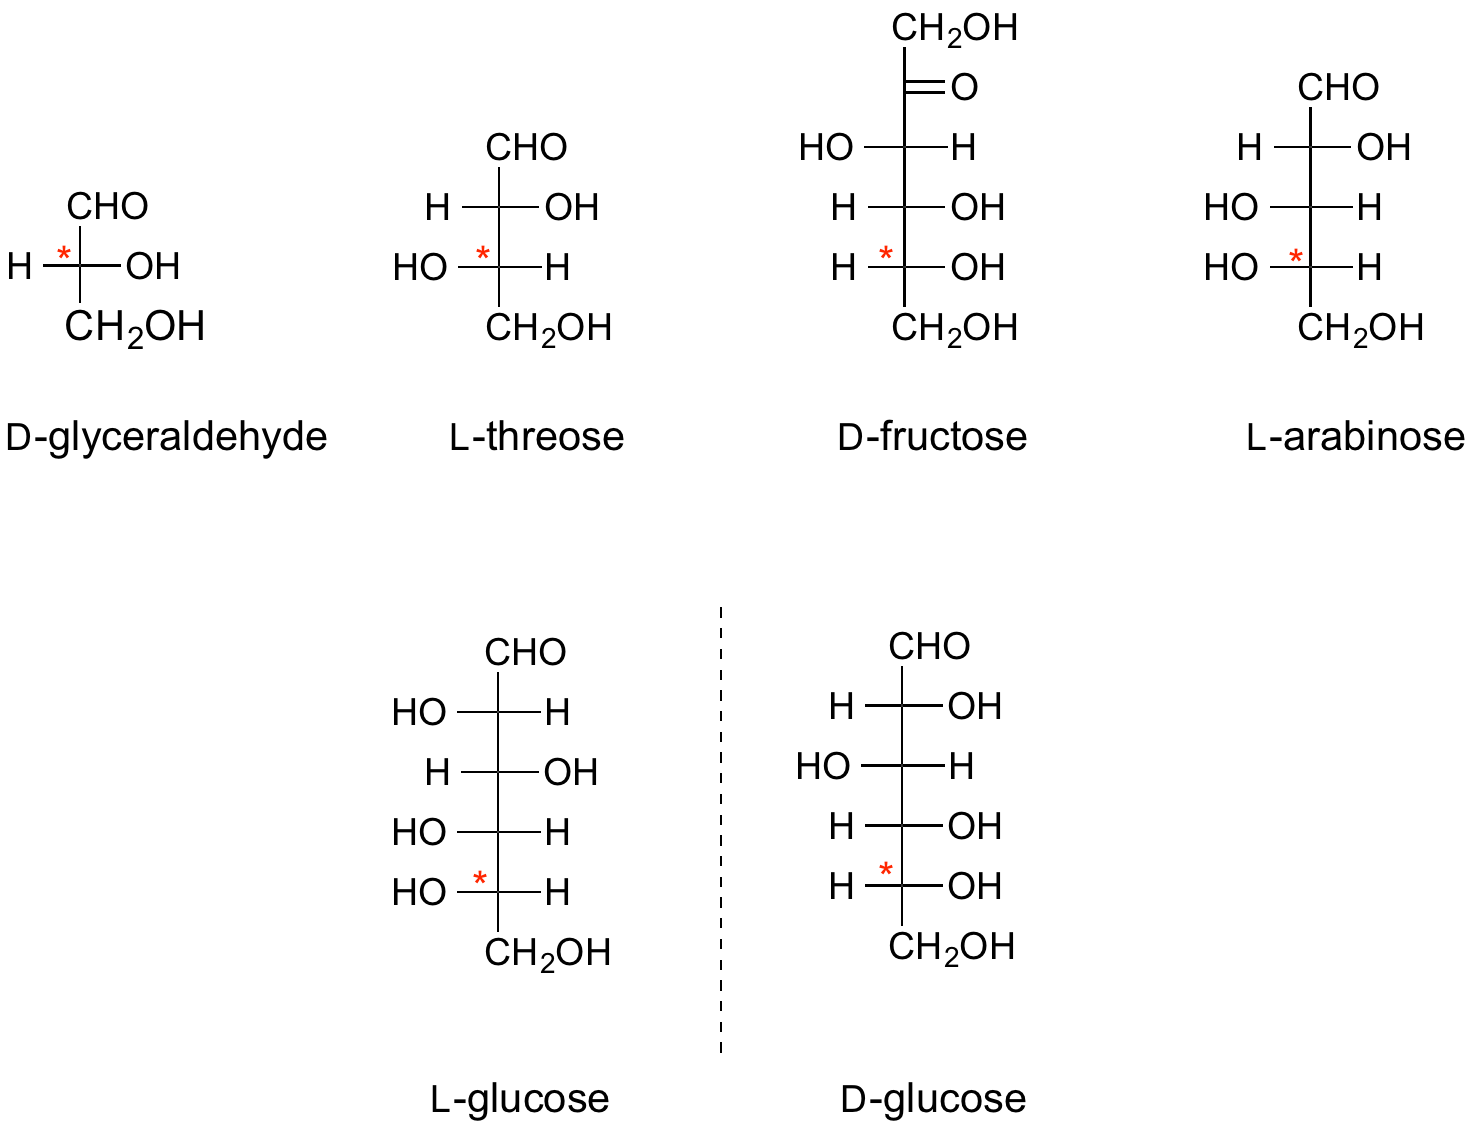 Fischer projections of representative sugars - the configurational "D" or "L" stereogeniccentre is denoted with an asterix